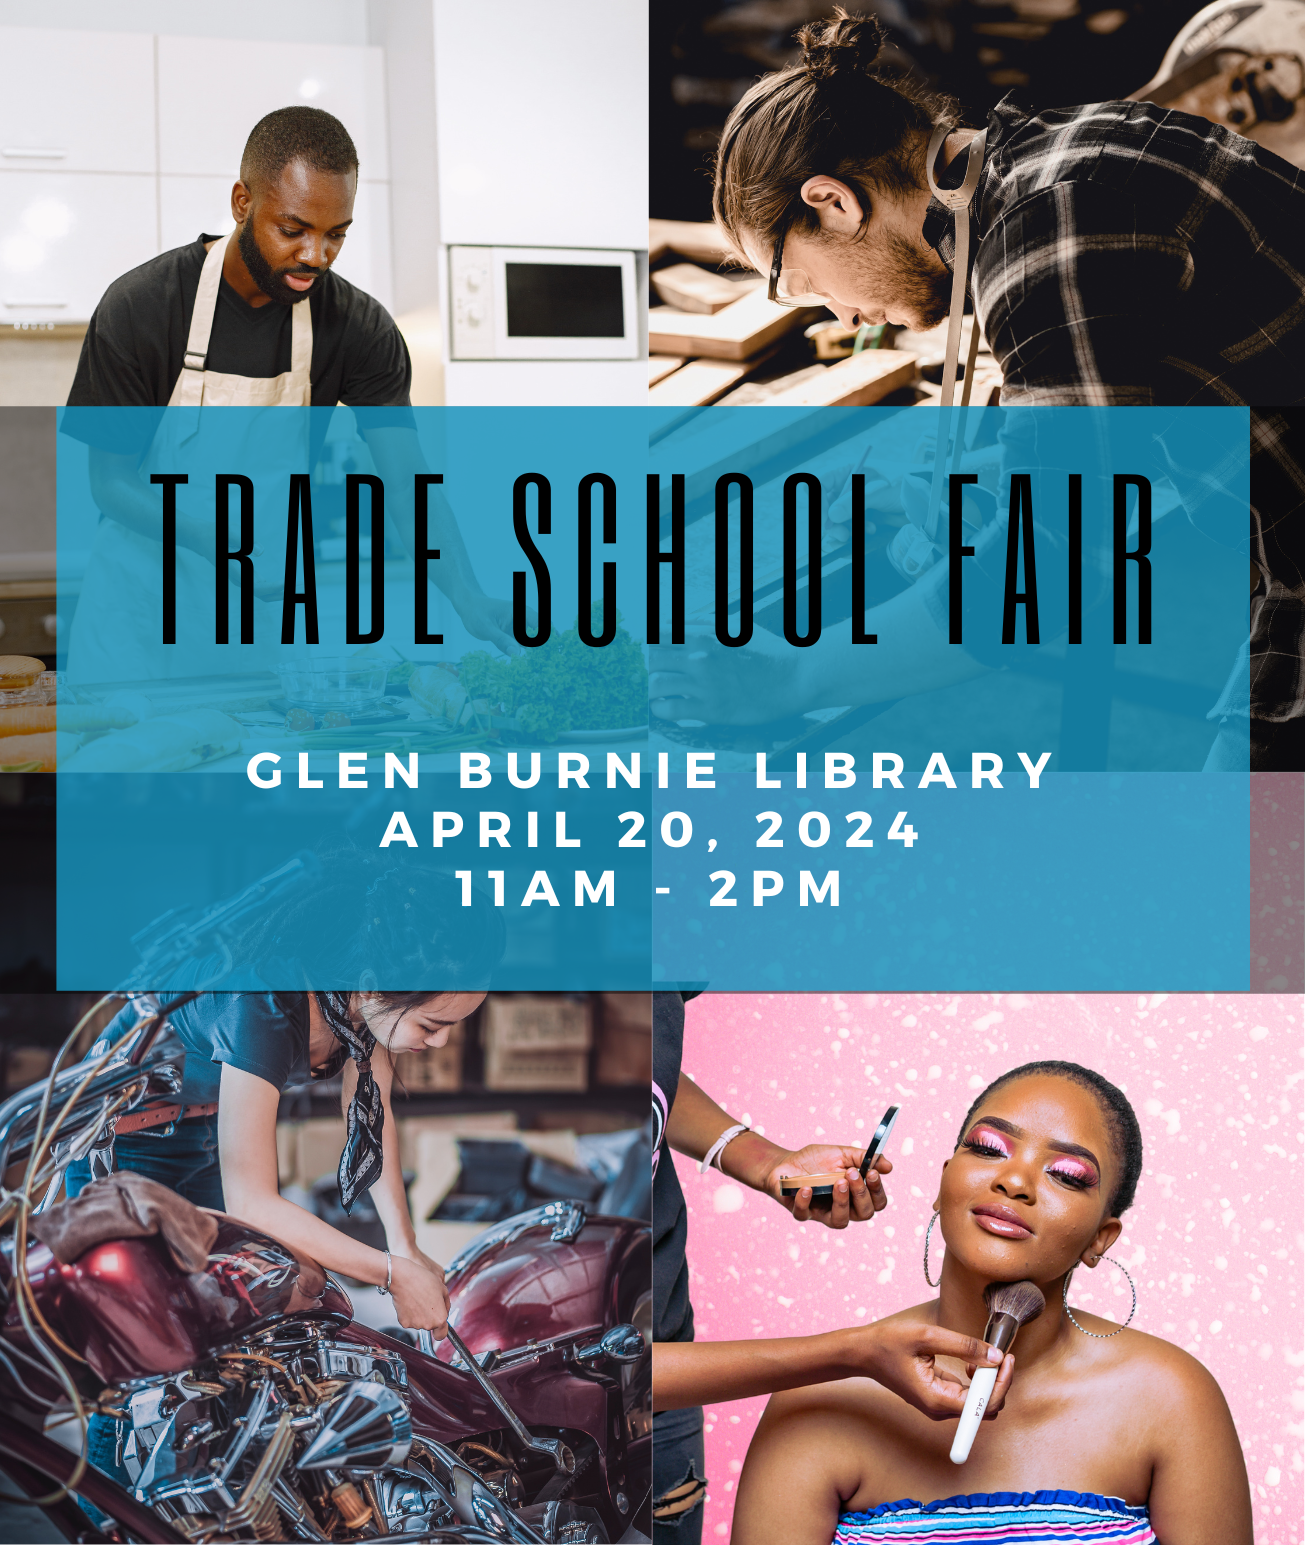 Text: Trade School Fair Glen Burnie Library April 20, 2024 11AM - 2PM overlay on four-image grid with individuals involved in cooking, motorcycle mechanics, cosmetology, and woodworking.